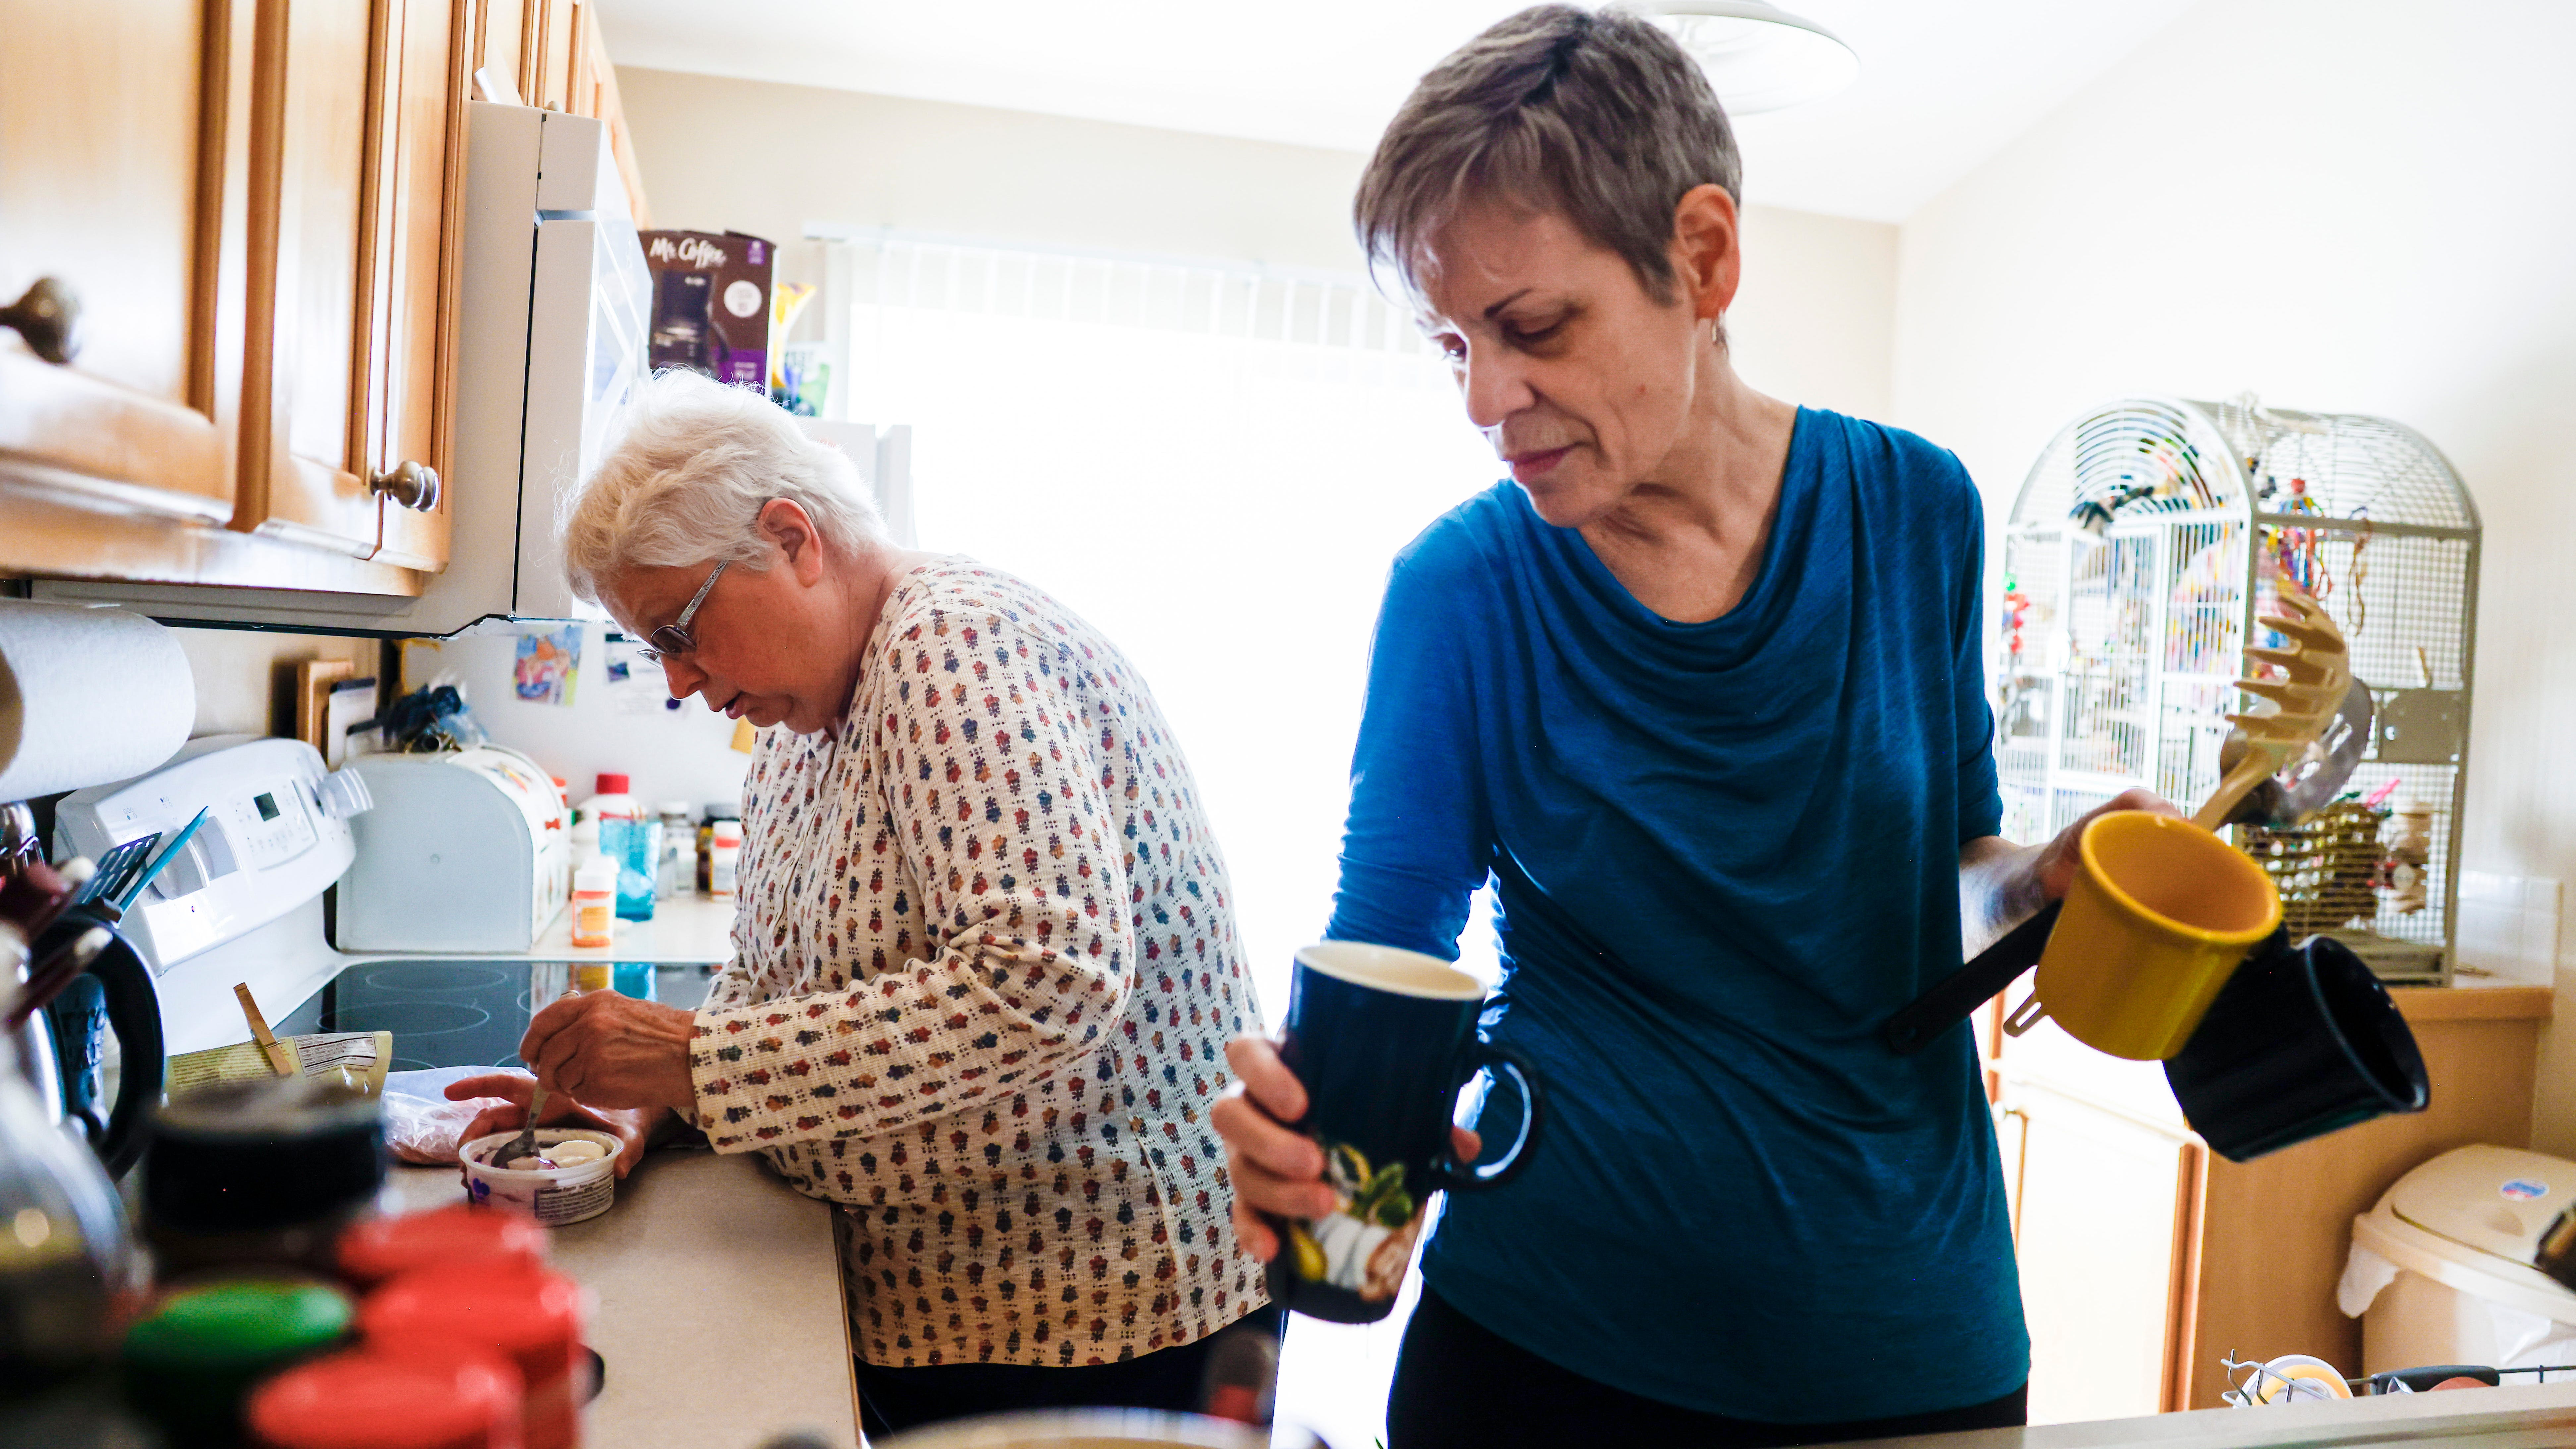 Marlene Mears, right, puts away dishes while Becky Miller, left, prepares food in their kitchen in Longmont, Colo.